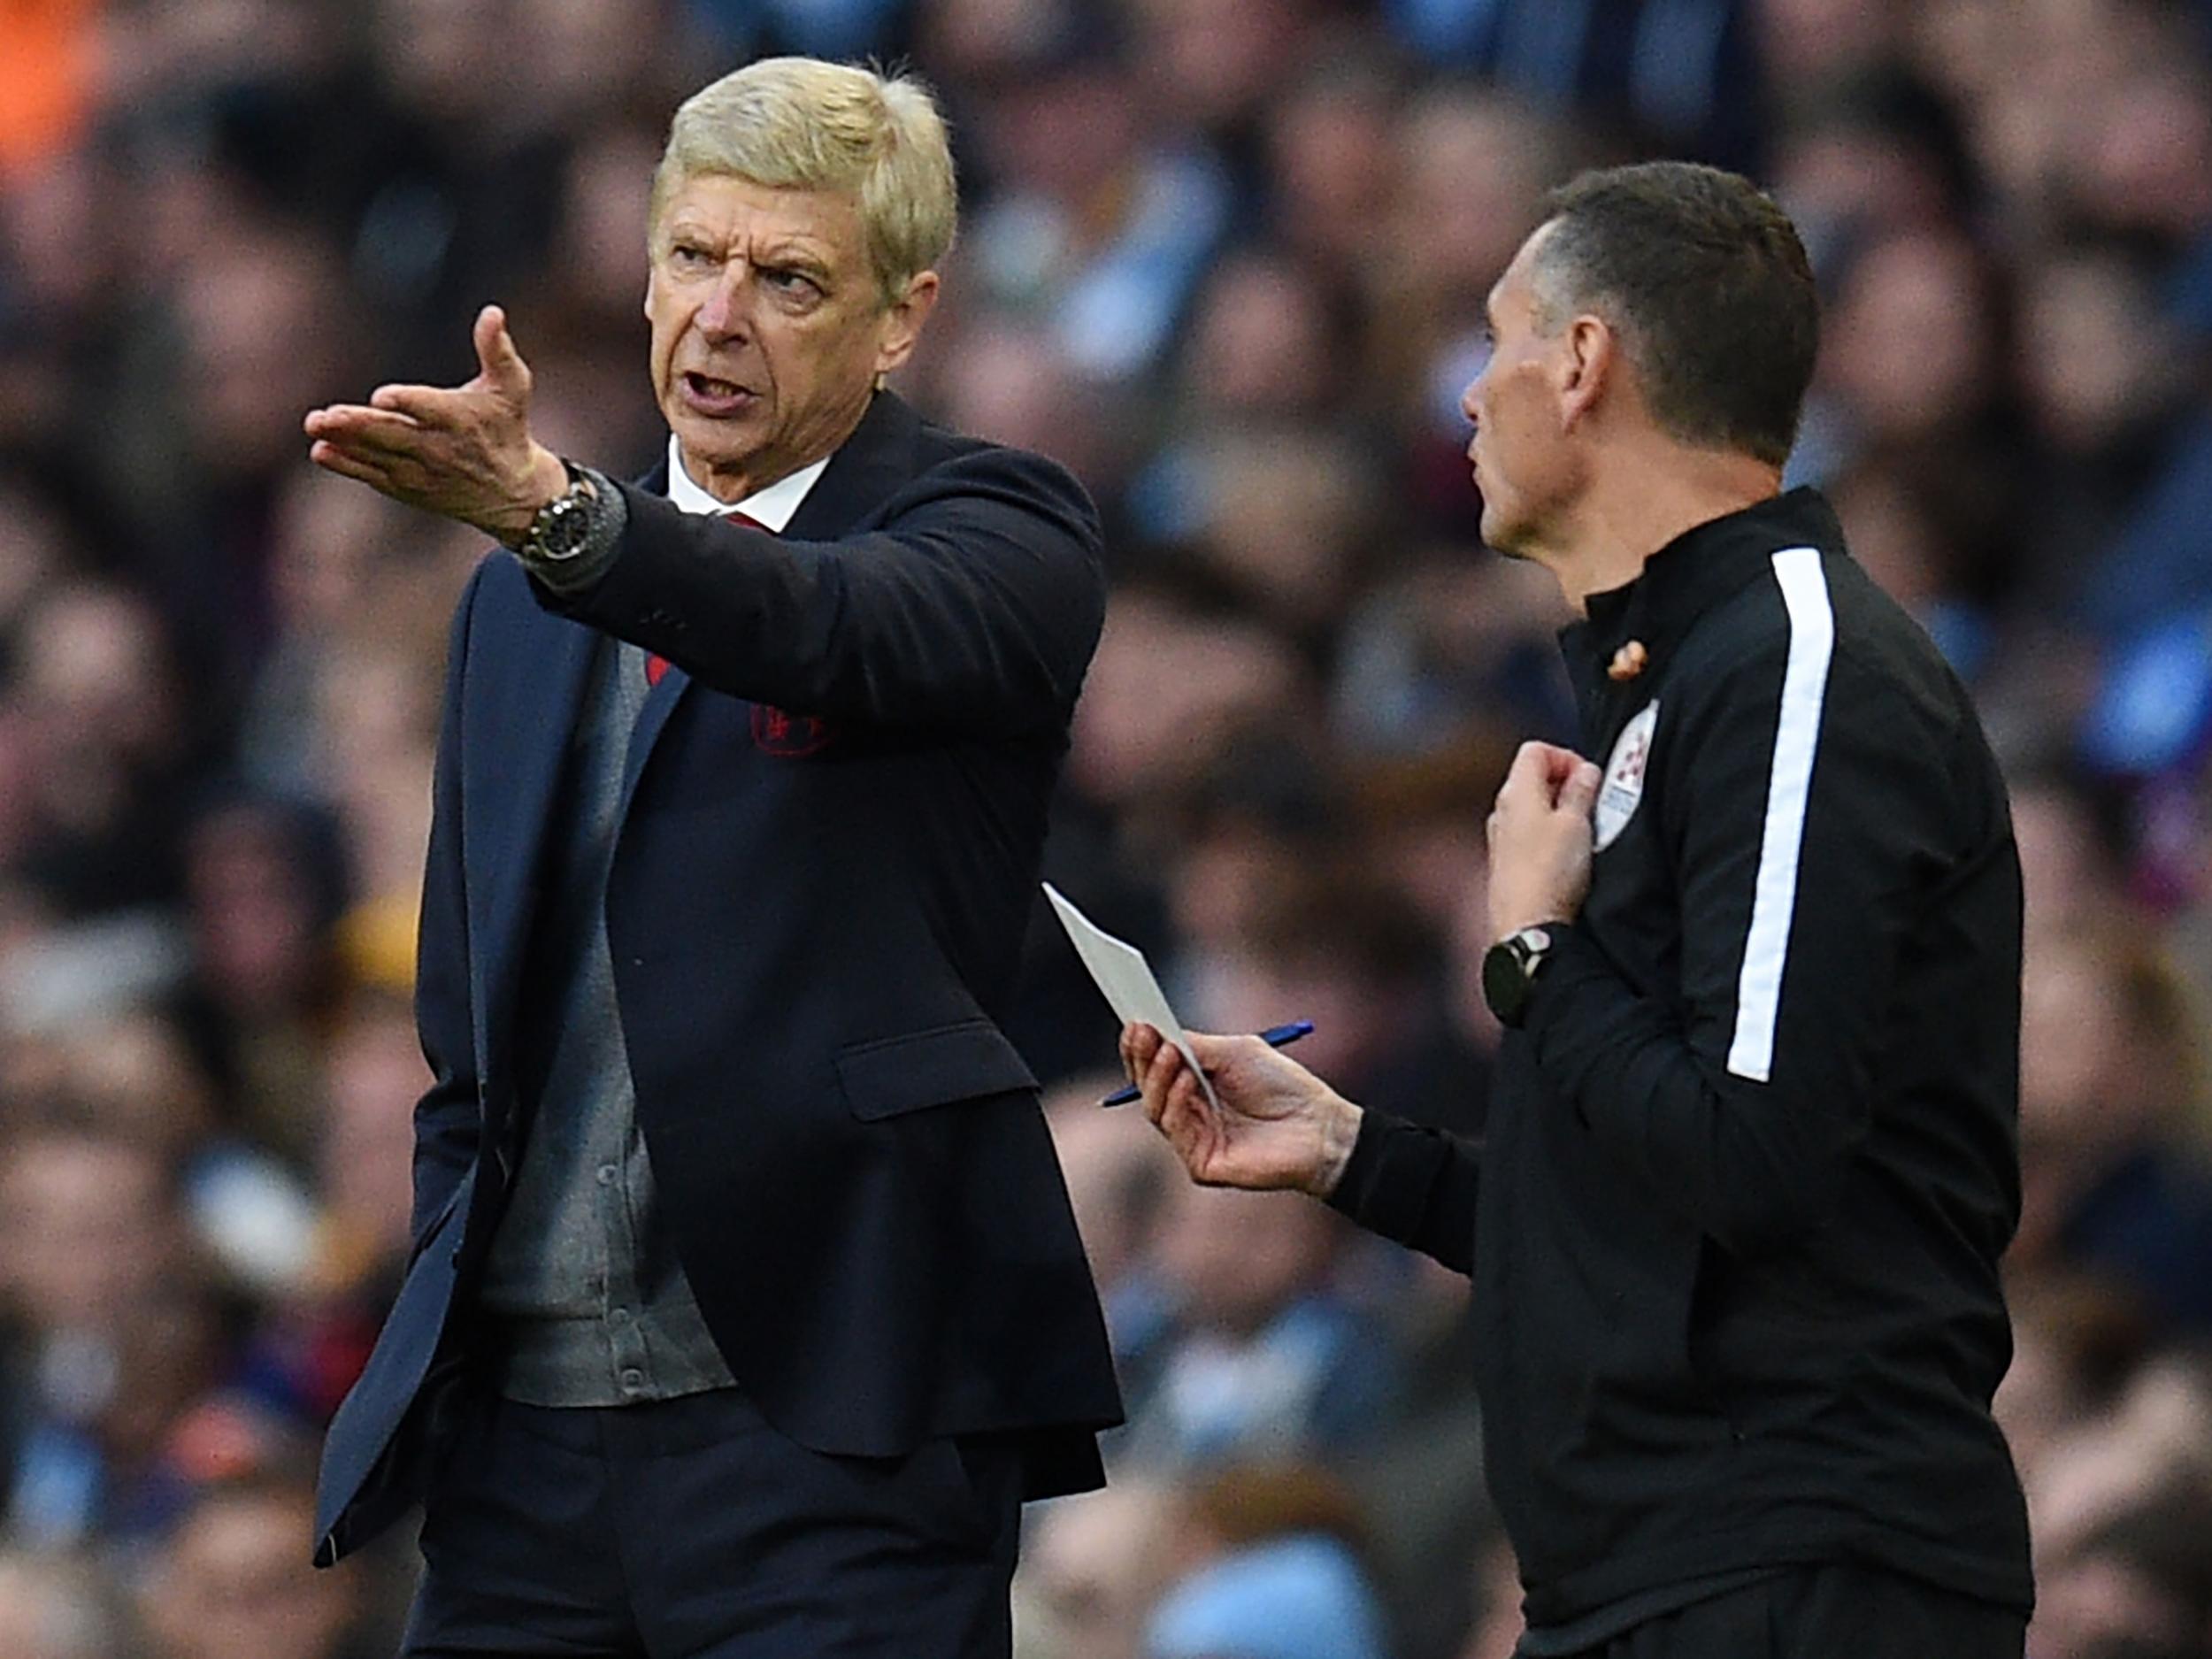 Arsene Wenger was left unhappy with referee Michael Oliver's performance